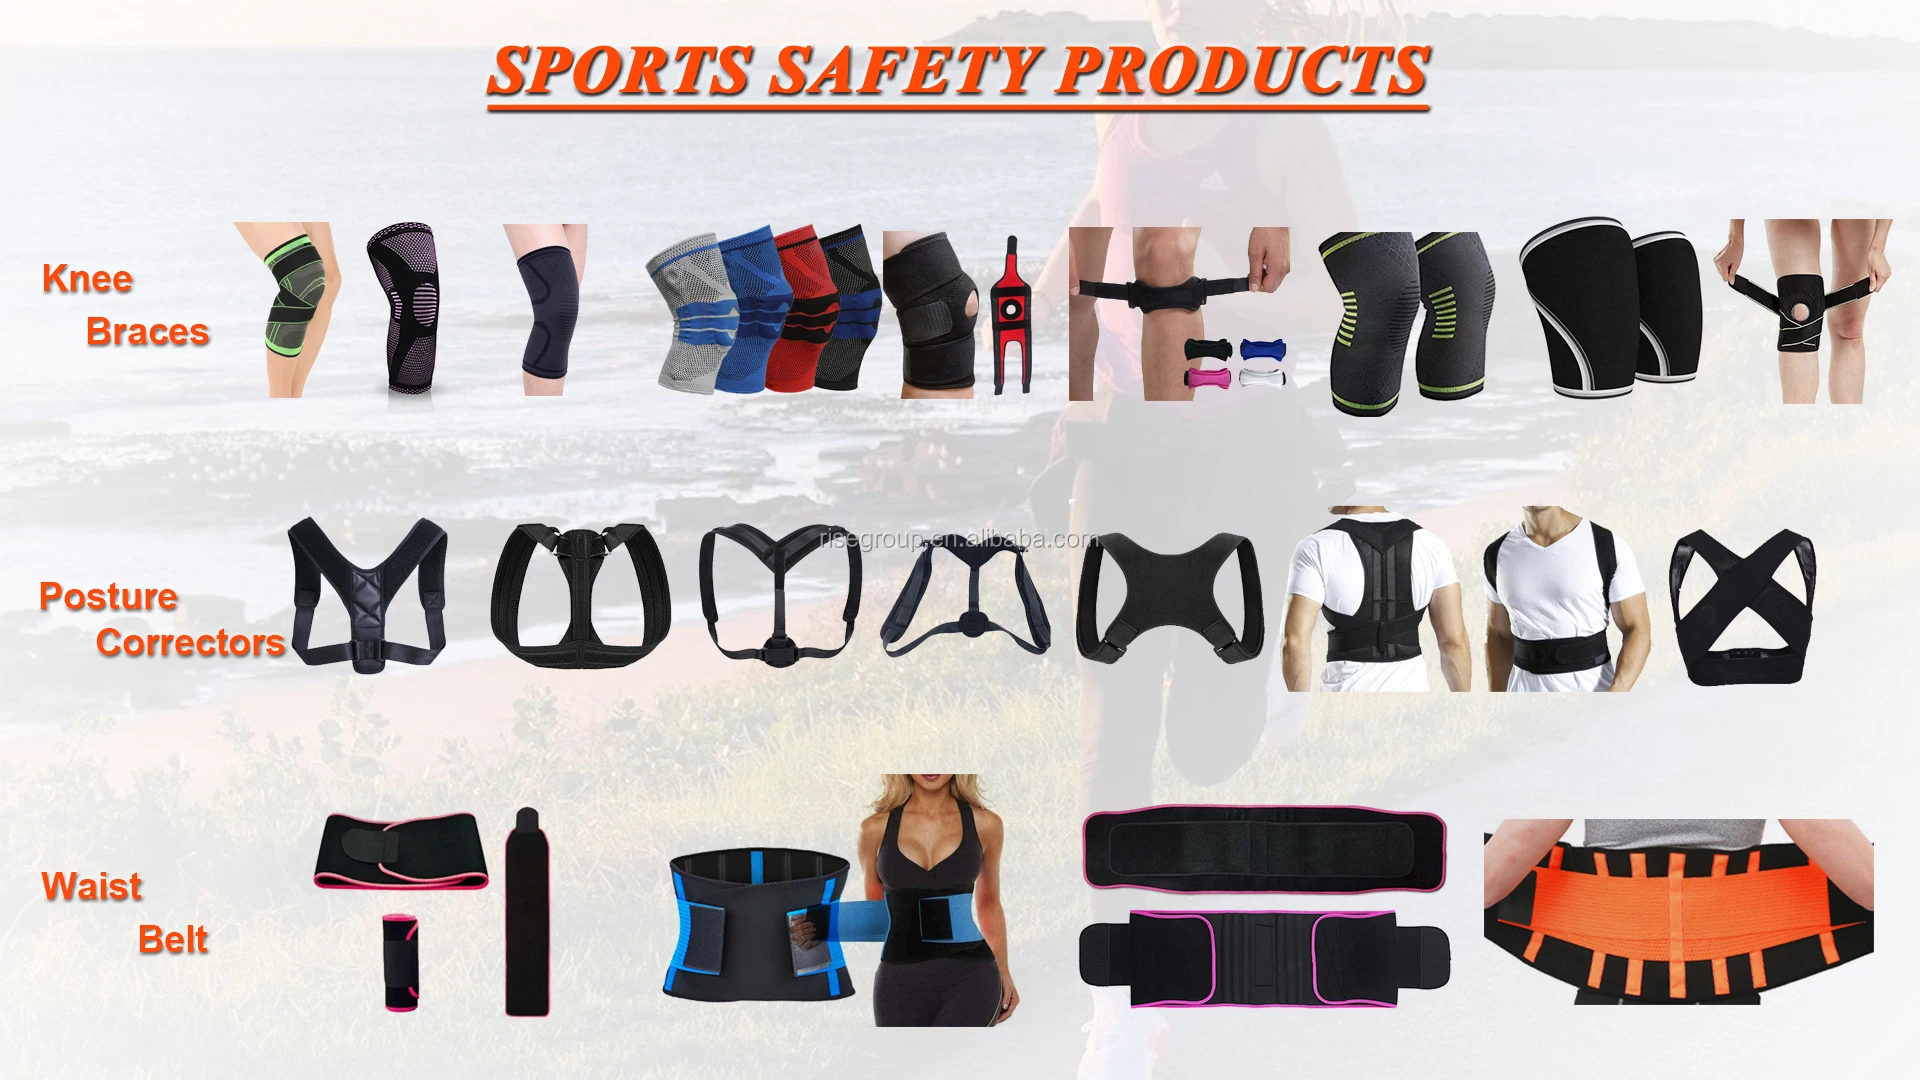 SPORTS SAFETY PRODUCTS